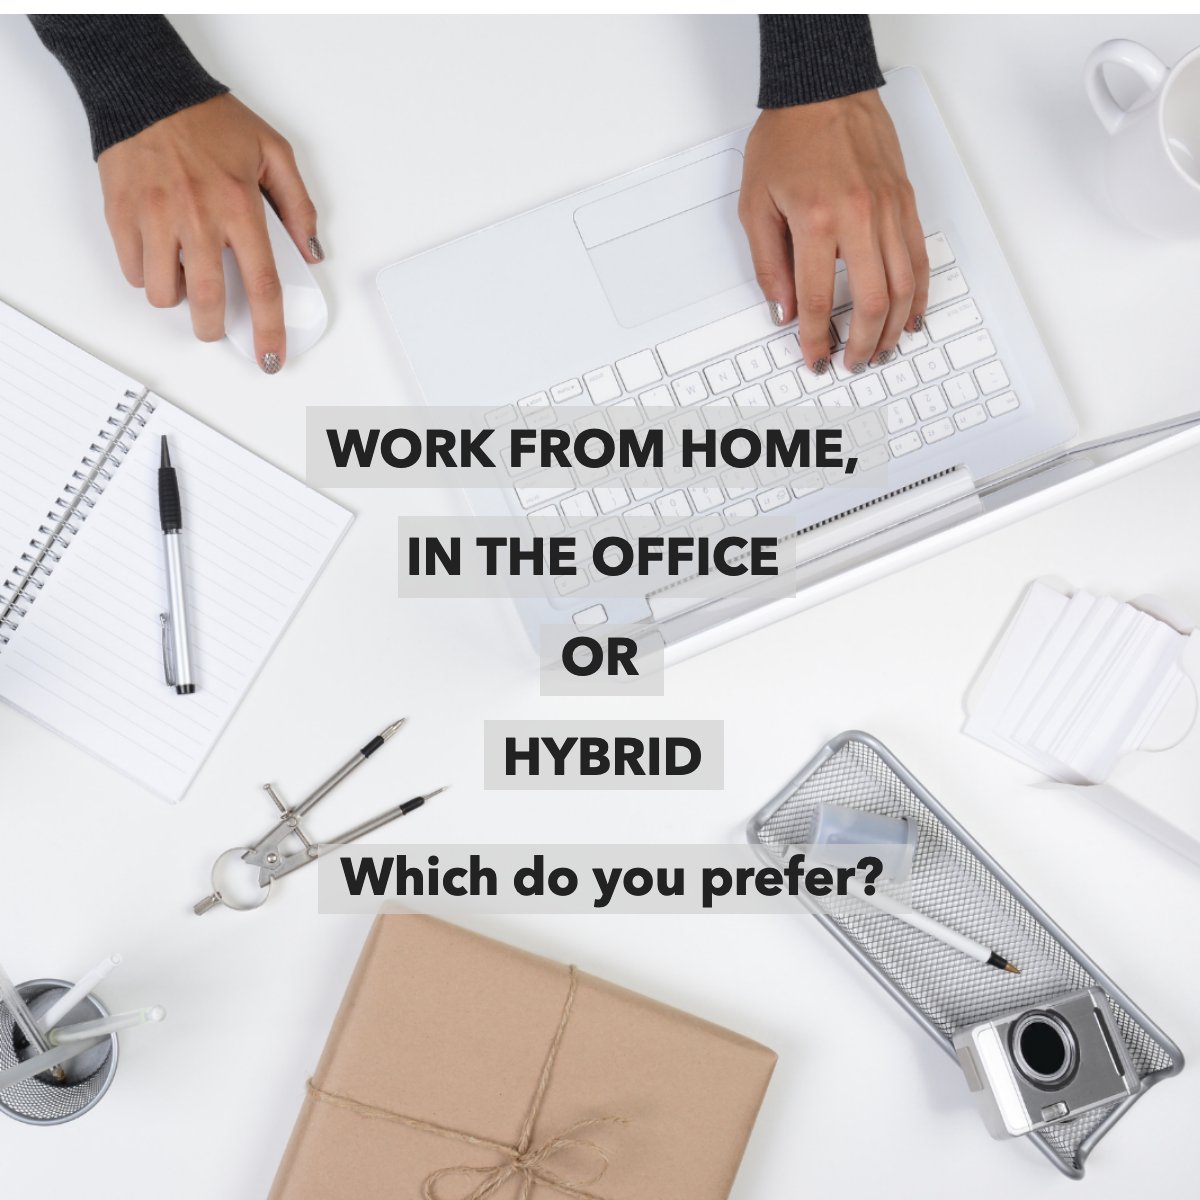 Do you have a dedicated working space? 💻
 
Tell us in the comments! 💭 

#question #workspace #worklife #homeoffice #hybridwork
 #realestate #househunting #property #houseforsale #MAhomes #massachusettsrealestate #justlisted #openhouse #newhome #homesweethome